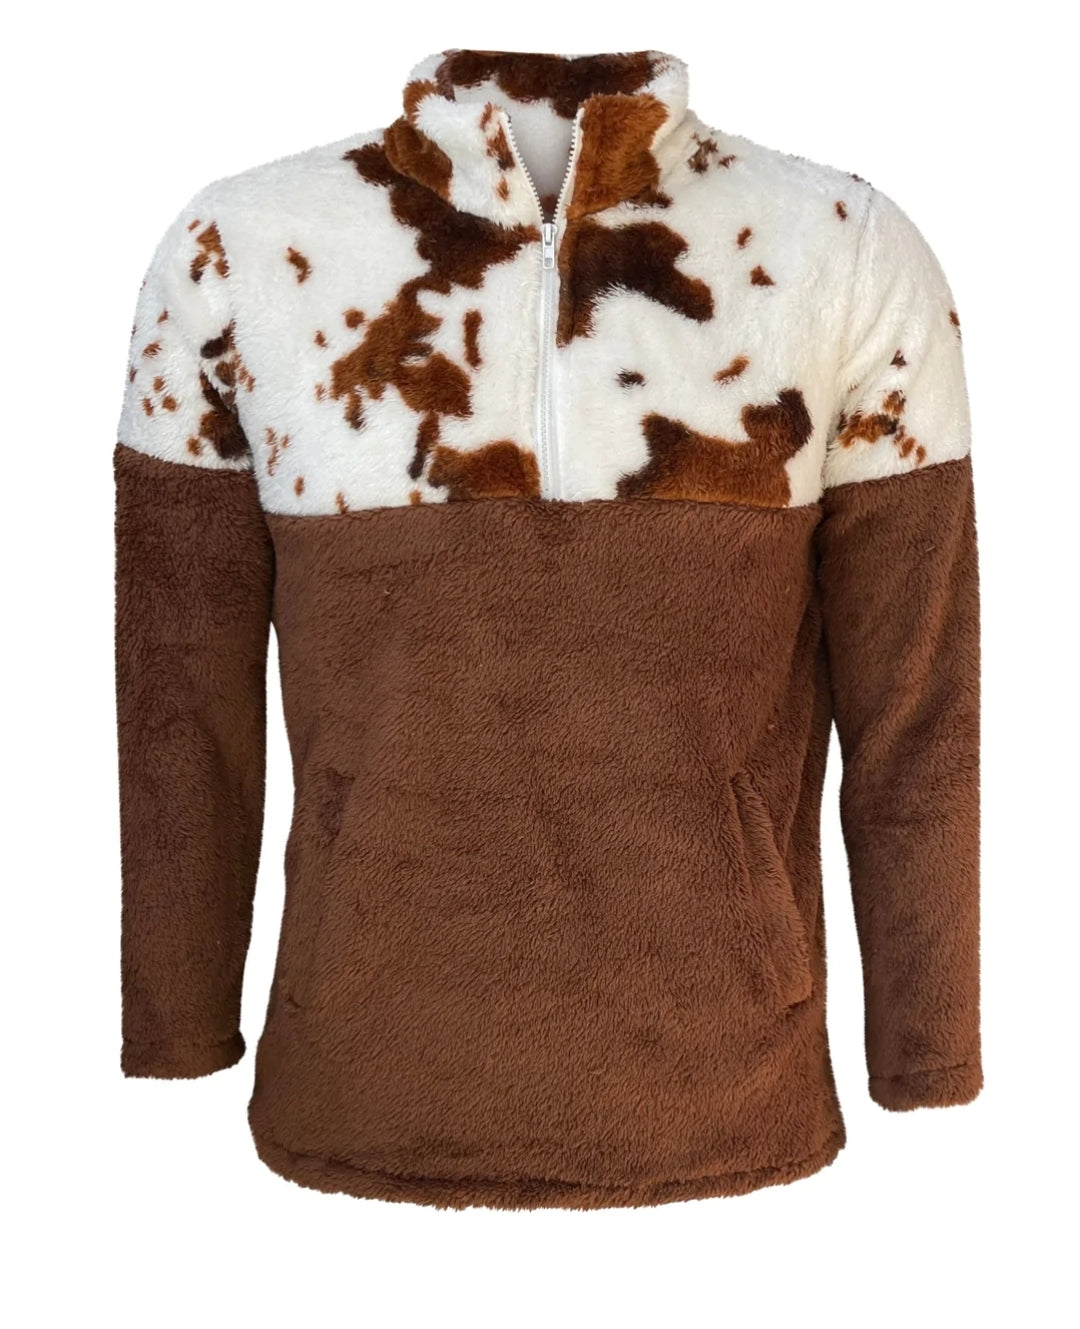 Brown & white sherpa Adult Xl